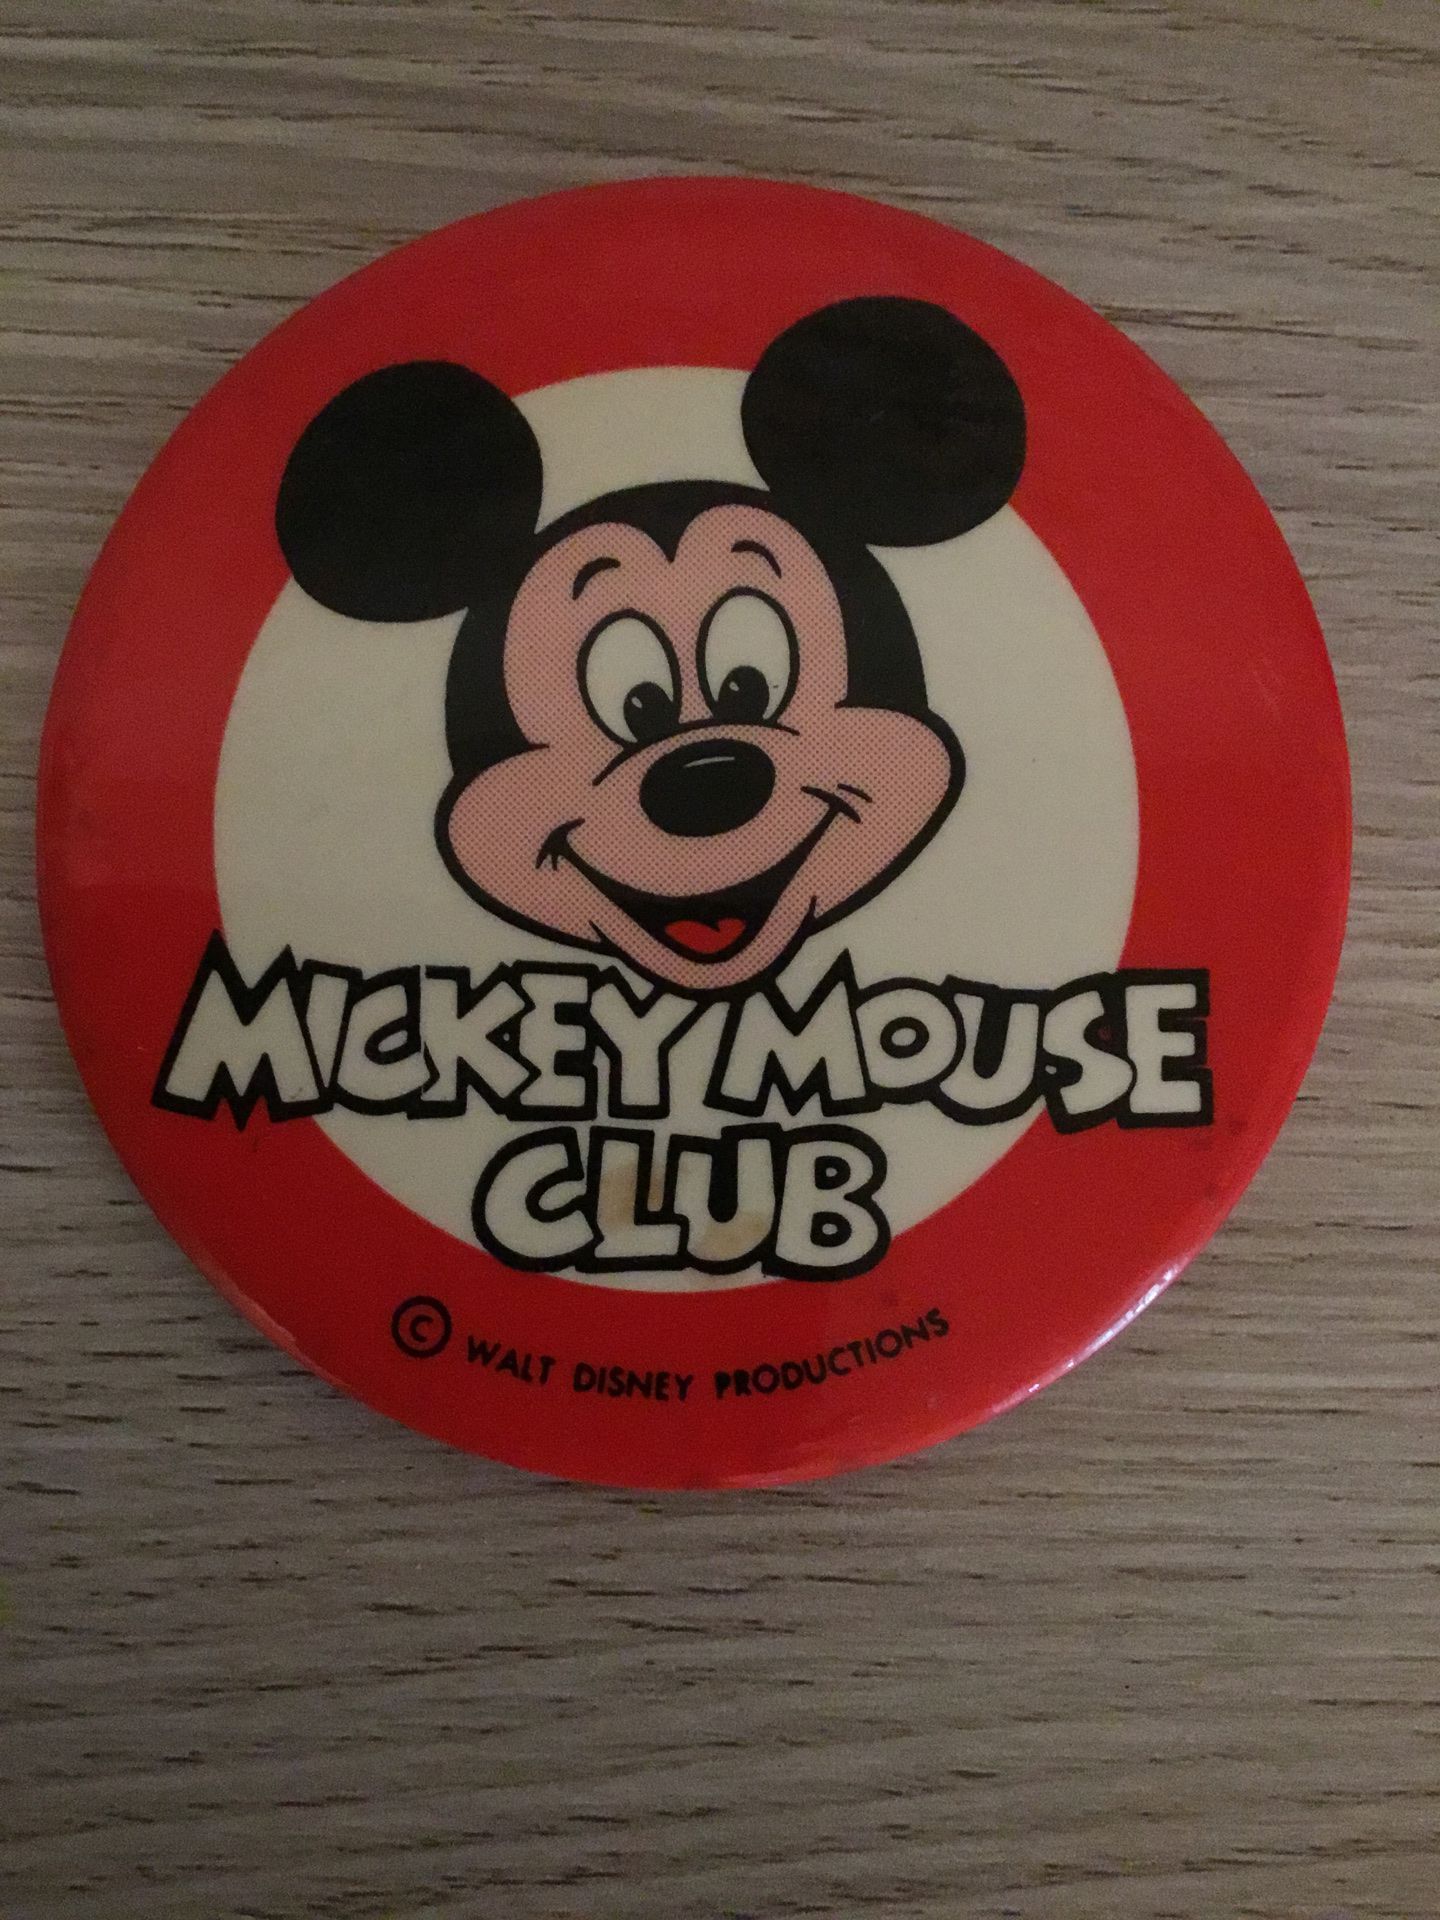 Vintage 1970’s Walt Disney Productions Mickey Mouse Club Pin